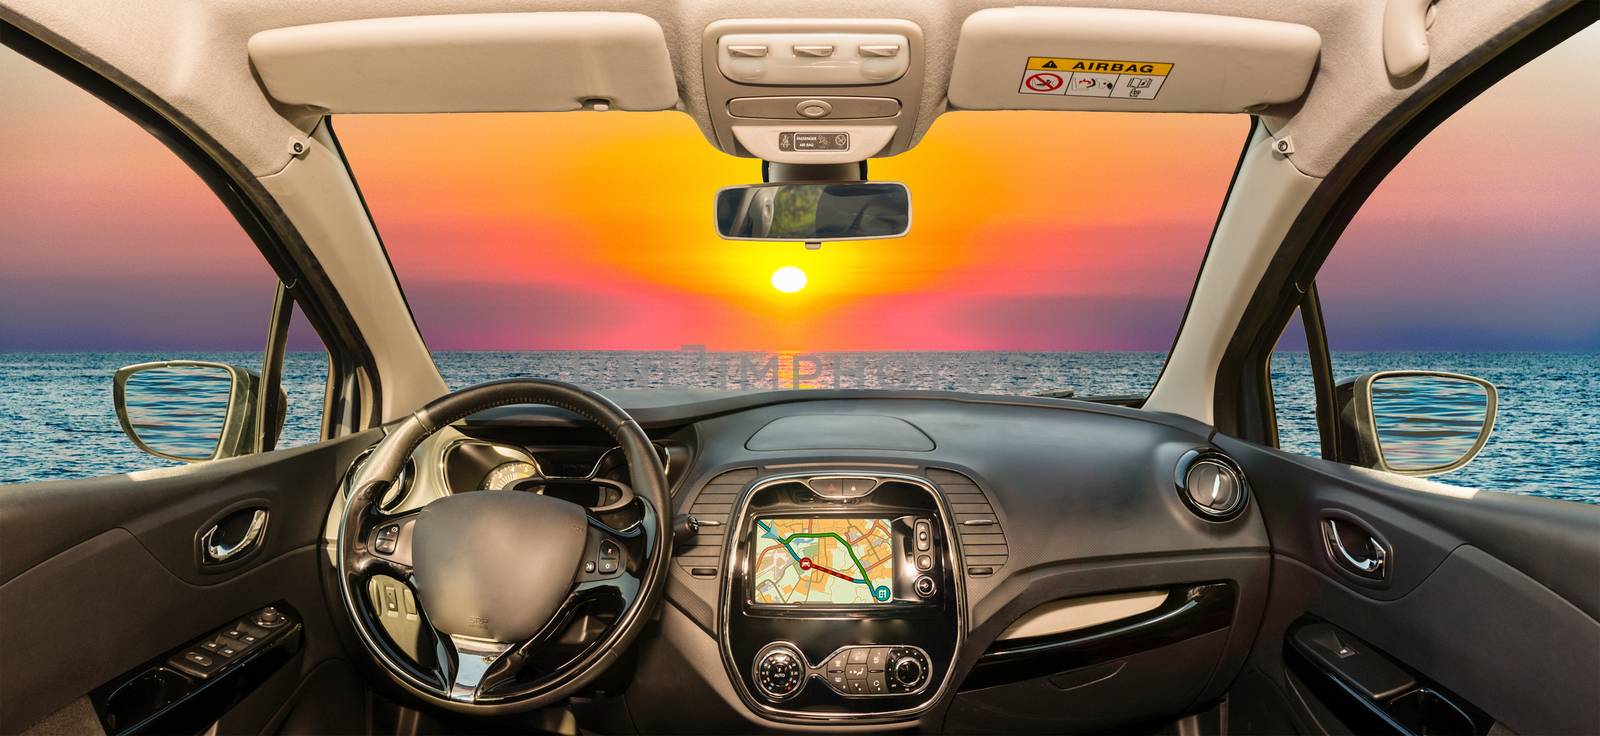 Looking through a car windshield with view over a scenic sunset on the mediterranean sea